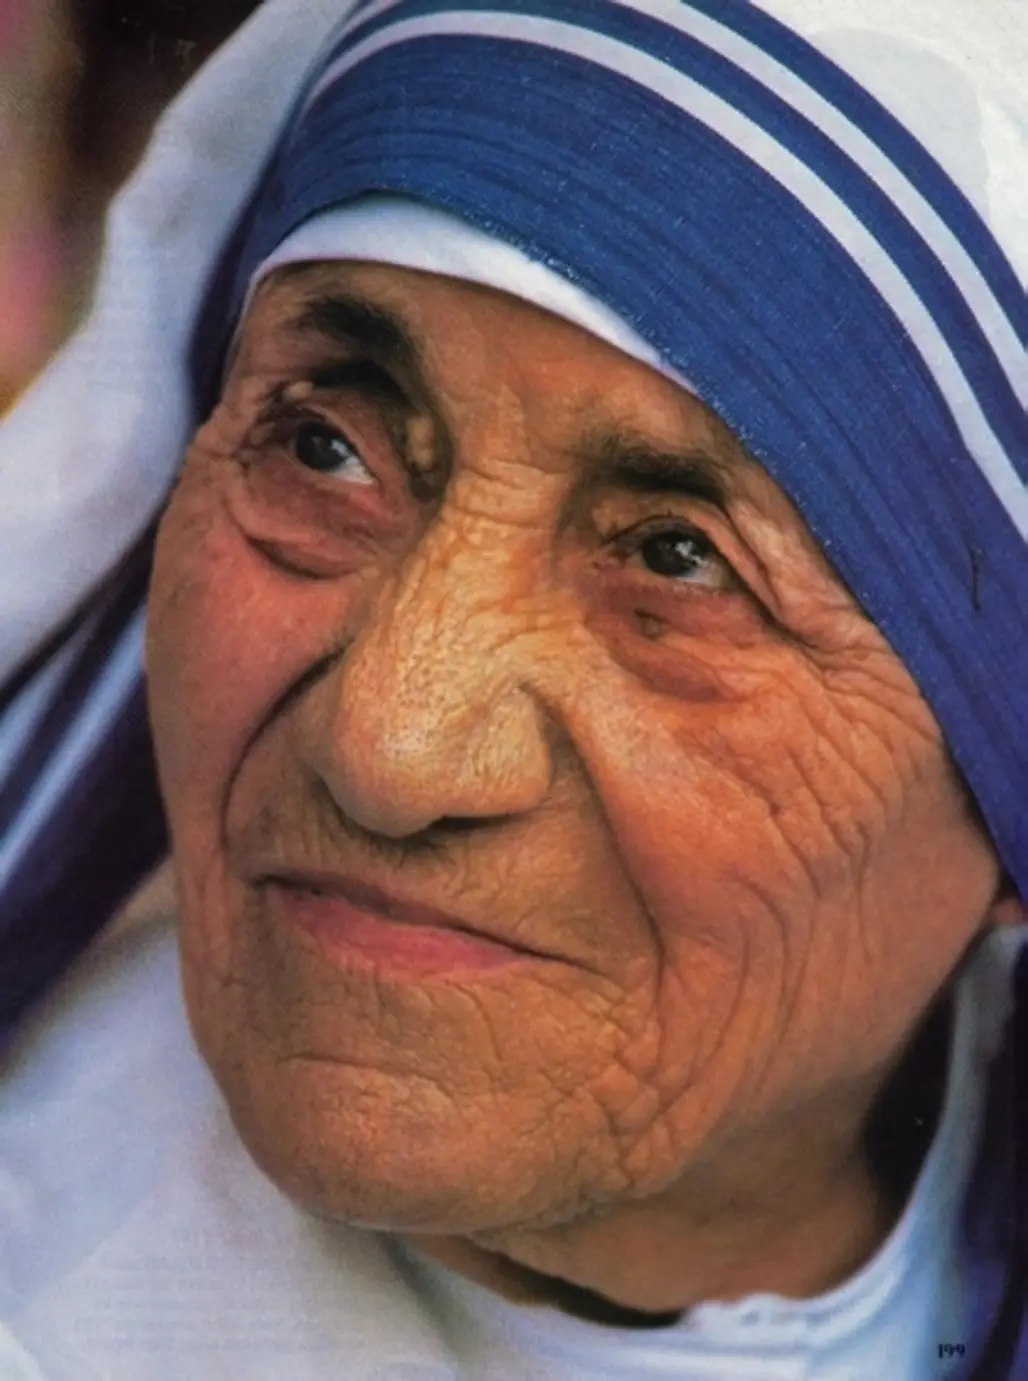 Mother Teresa, Founder of the Order of the Missionaries of Charity